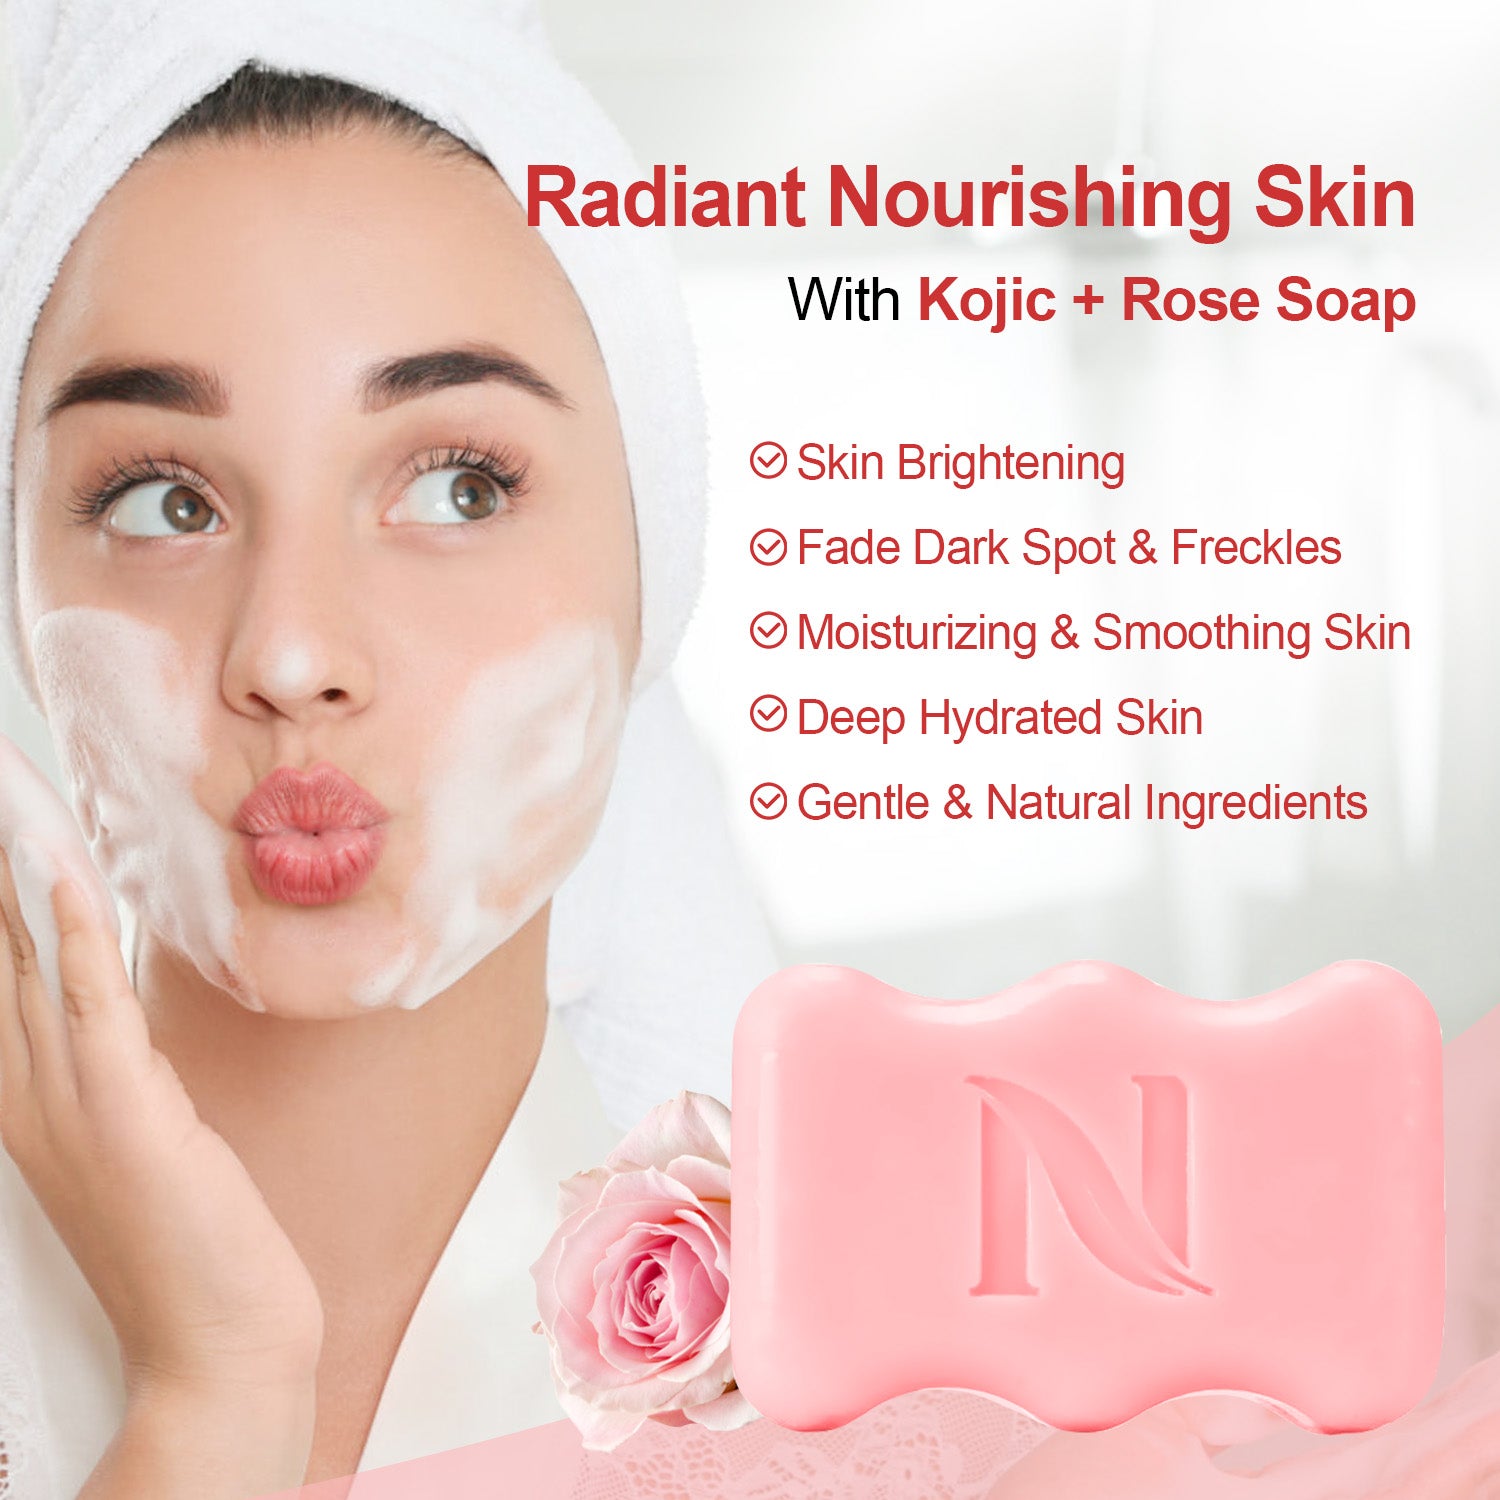 Kojic acid+rose soap company for fade dark spot and freckles